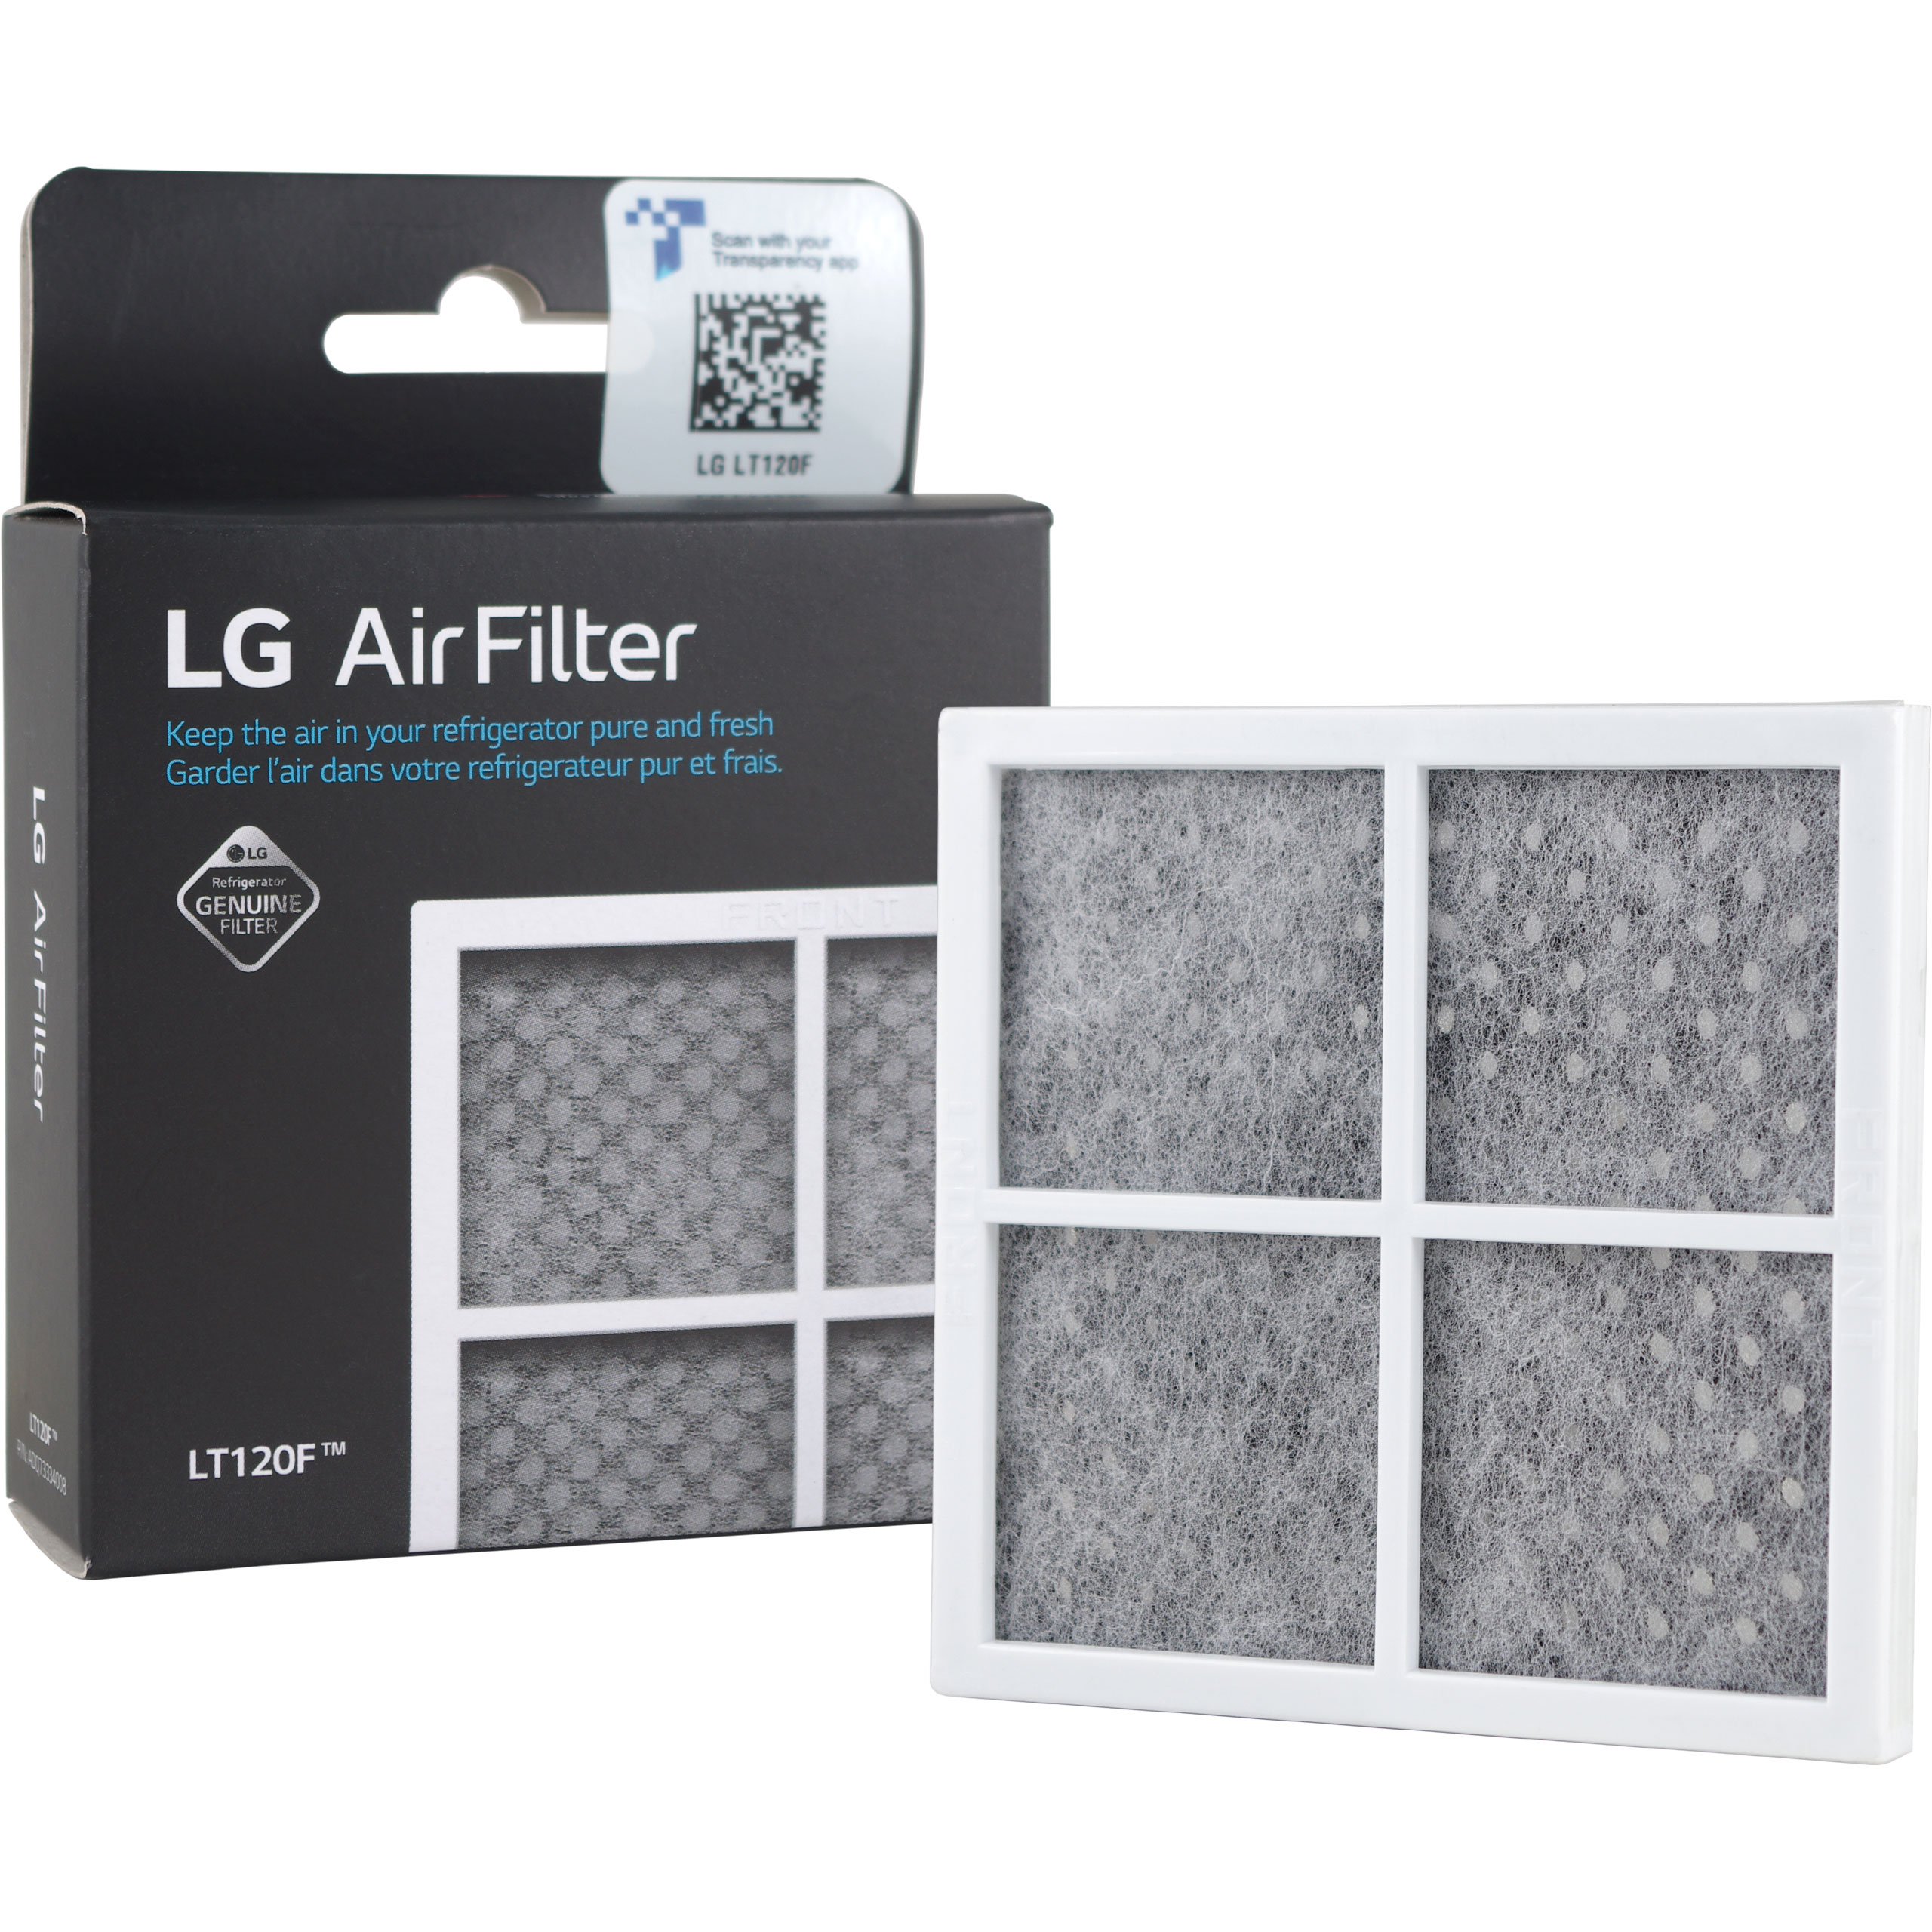 Refrigerator Air Filter Replacement LT120F Fresh Filters Compatible with Kenmore & LG Refrigerators Replaces ADQ73214408 ADQ73214402 ADQ73214404 ADQ73214405 ADQ73214406 AP6990312 PS3654115 Pack of 3 